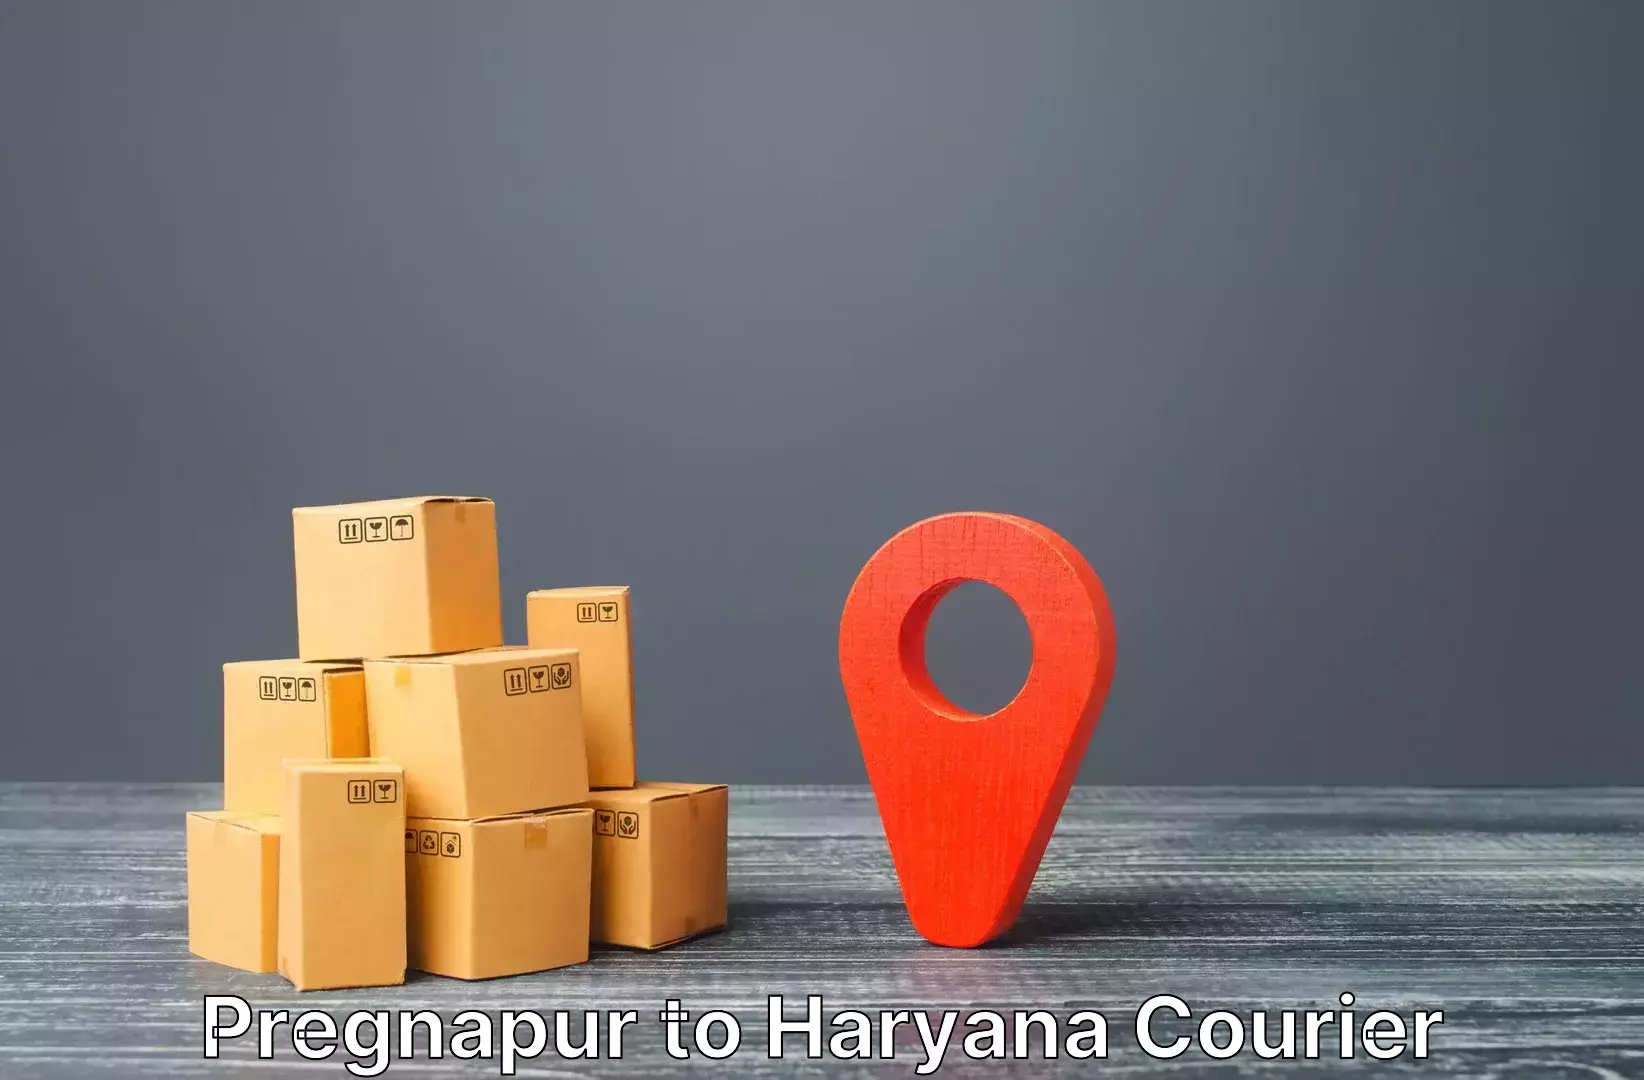 Luggage delivery logistics Pregnapur to Palwal